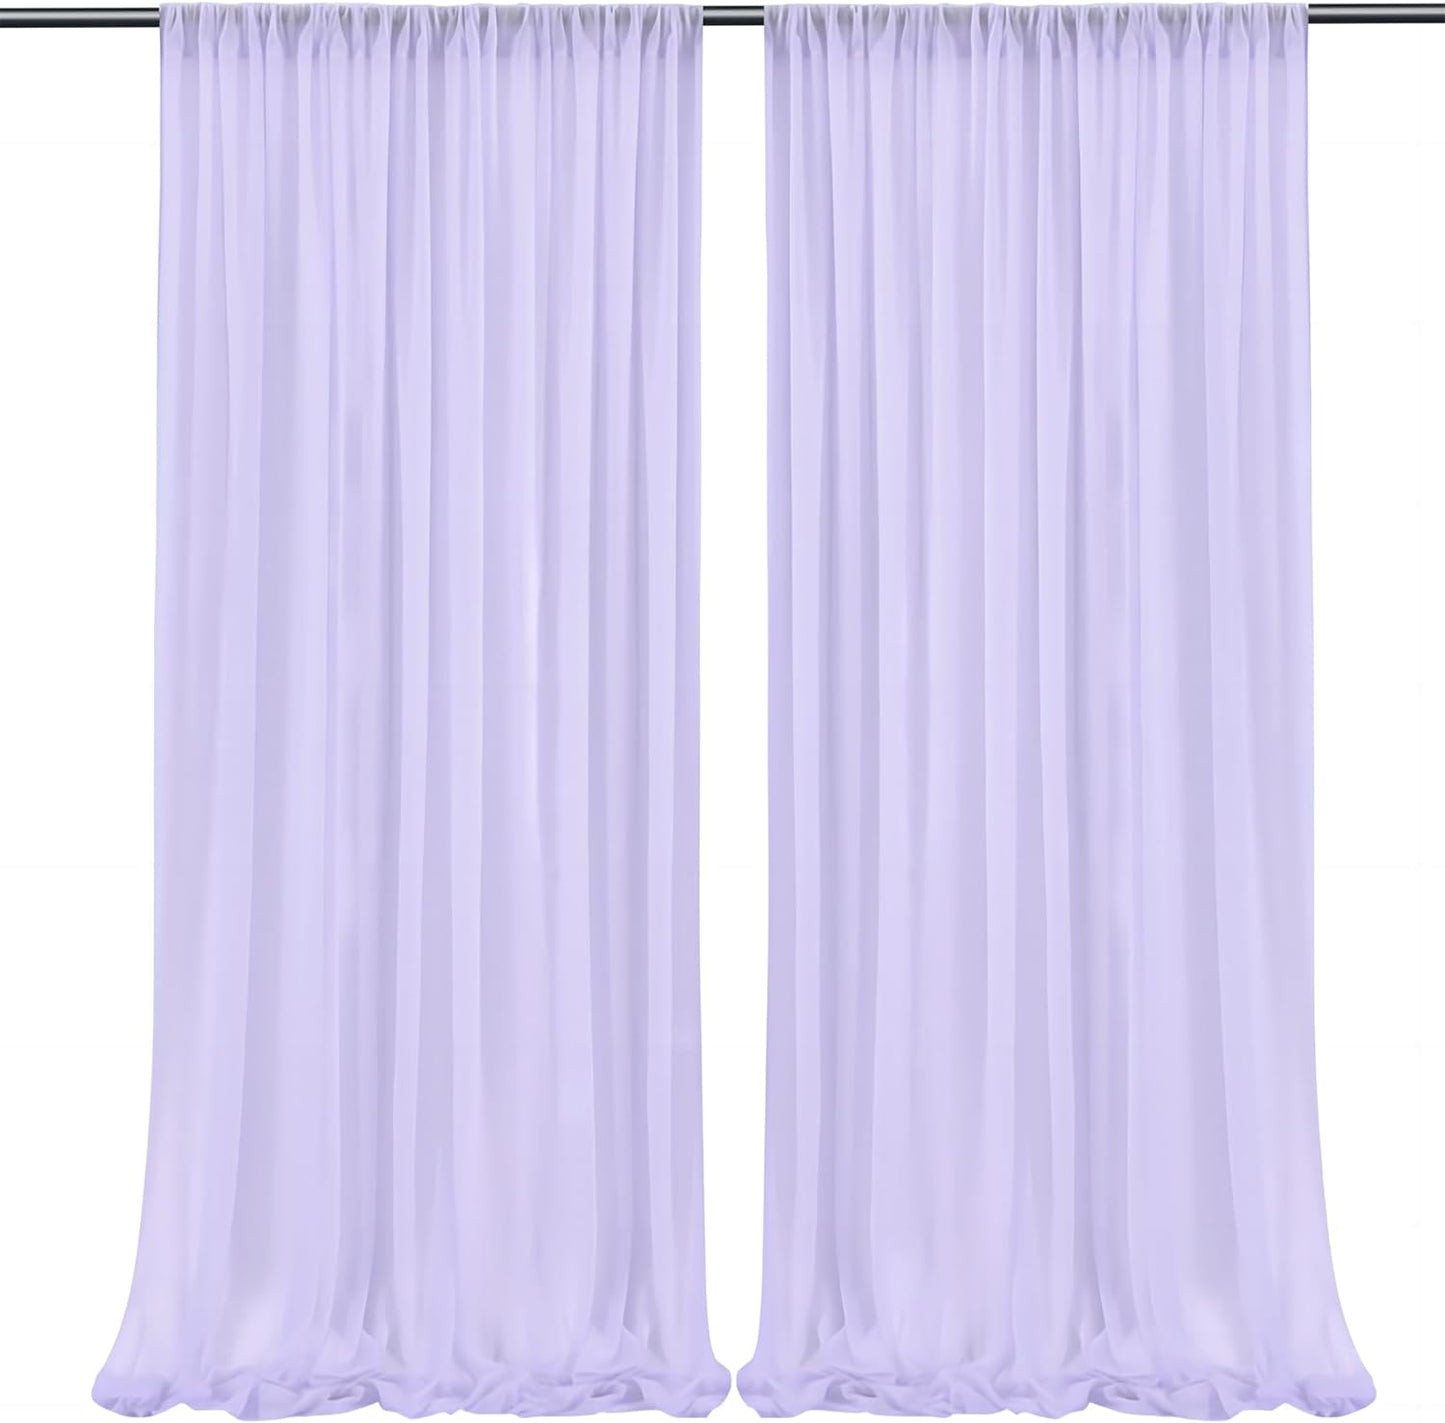 10Ft X 10Ft White Chiffon Backdrop Curtains, Wrinkle-Free Sheer Chiffon Fabric Curtain Drapes for Wedding Ceremony Arch Party Stage Decoration  Wish Care Lilac  